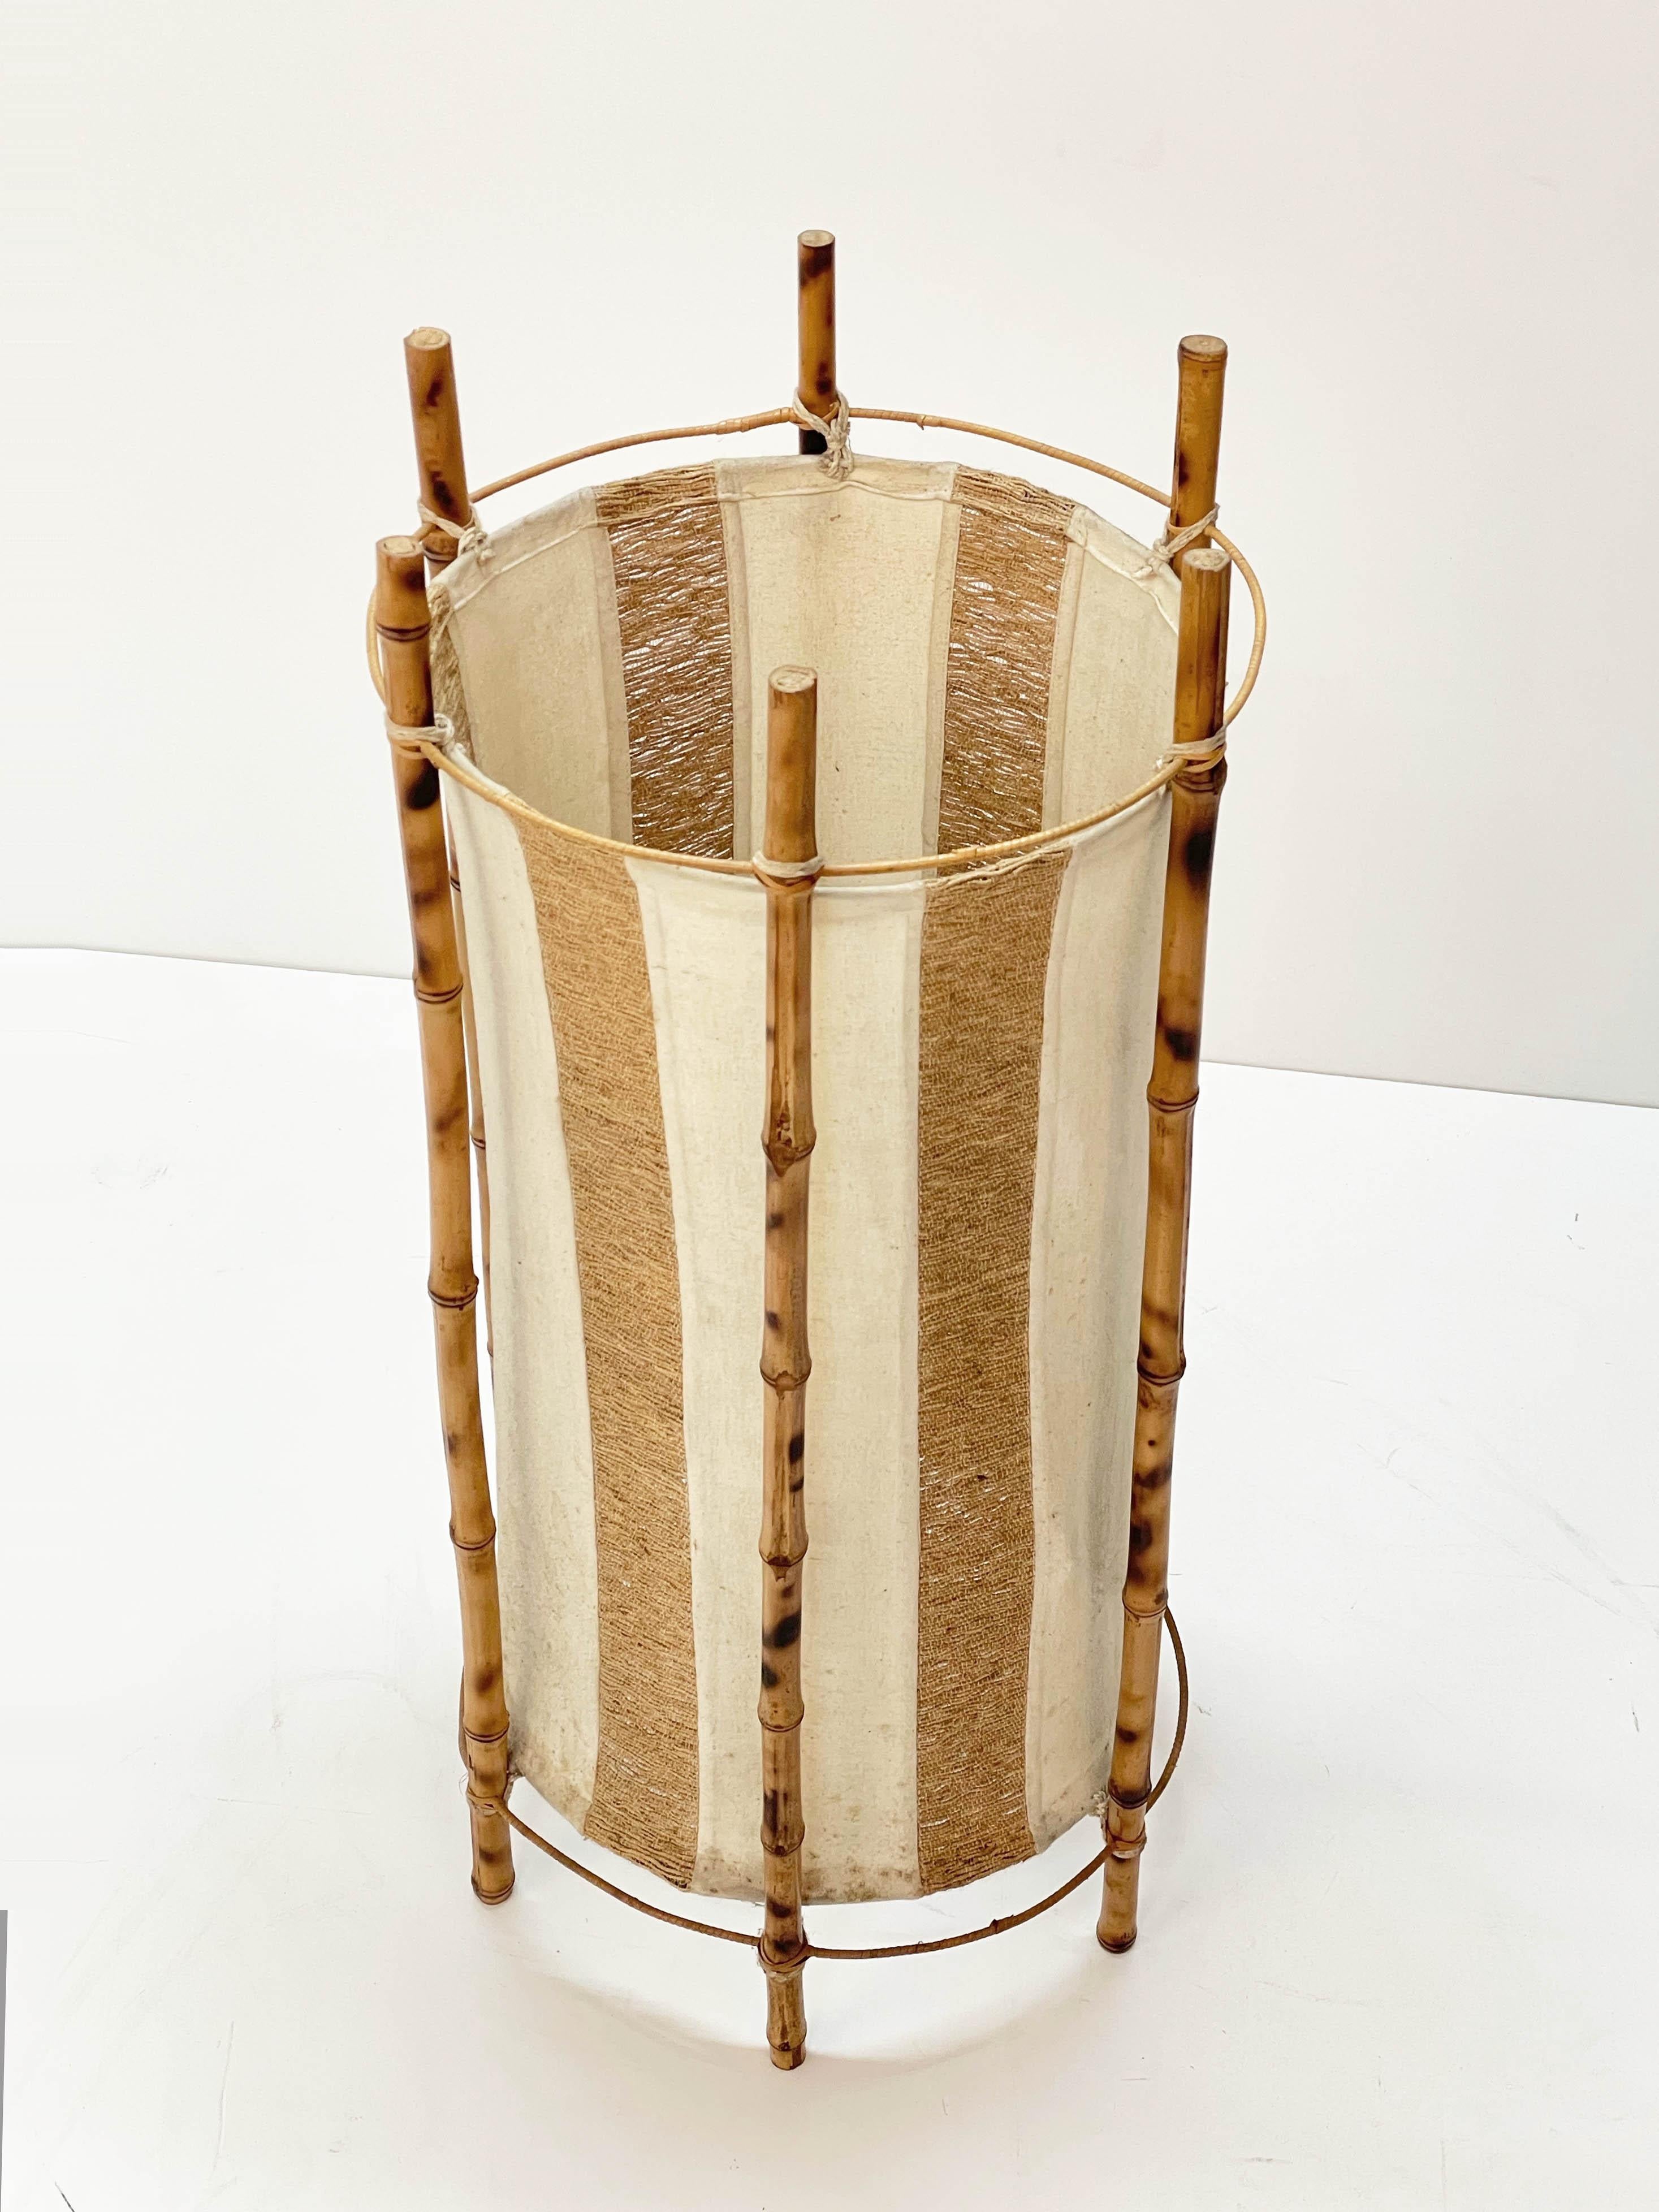 Louis Sognot Midcentury Cotton, Bamboo and Rattan Italian Floor Lamp, 1950s For Sale 9